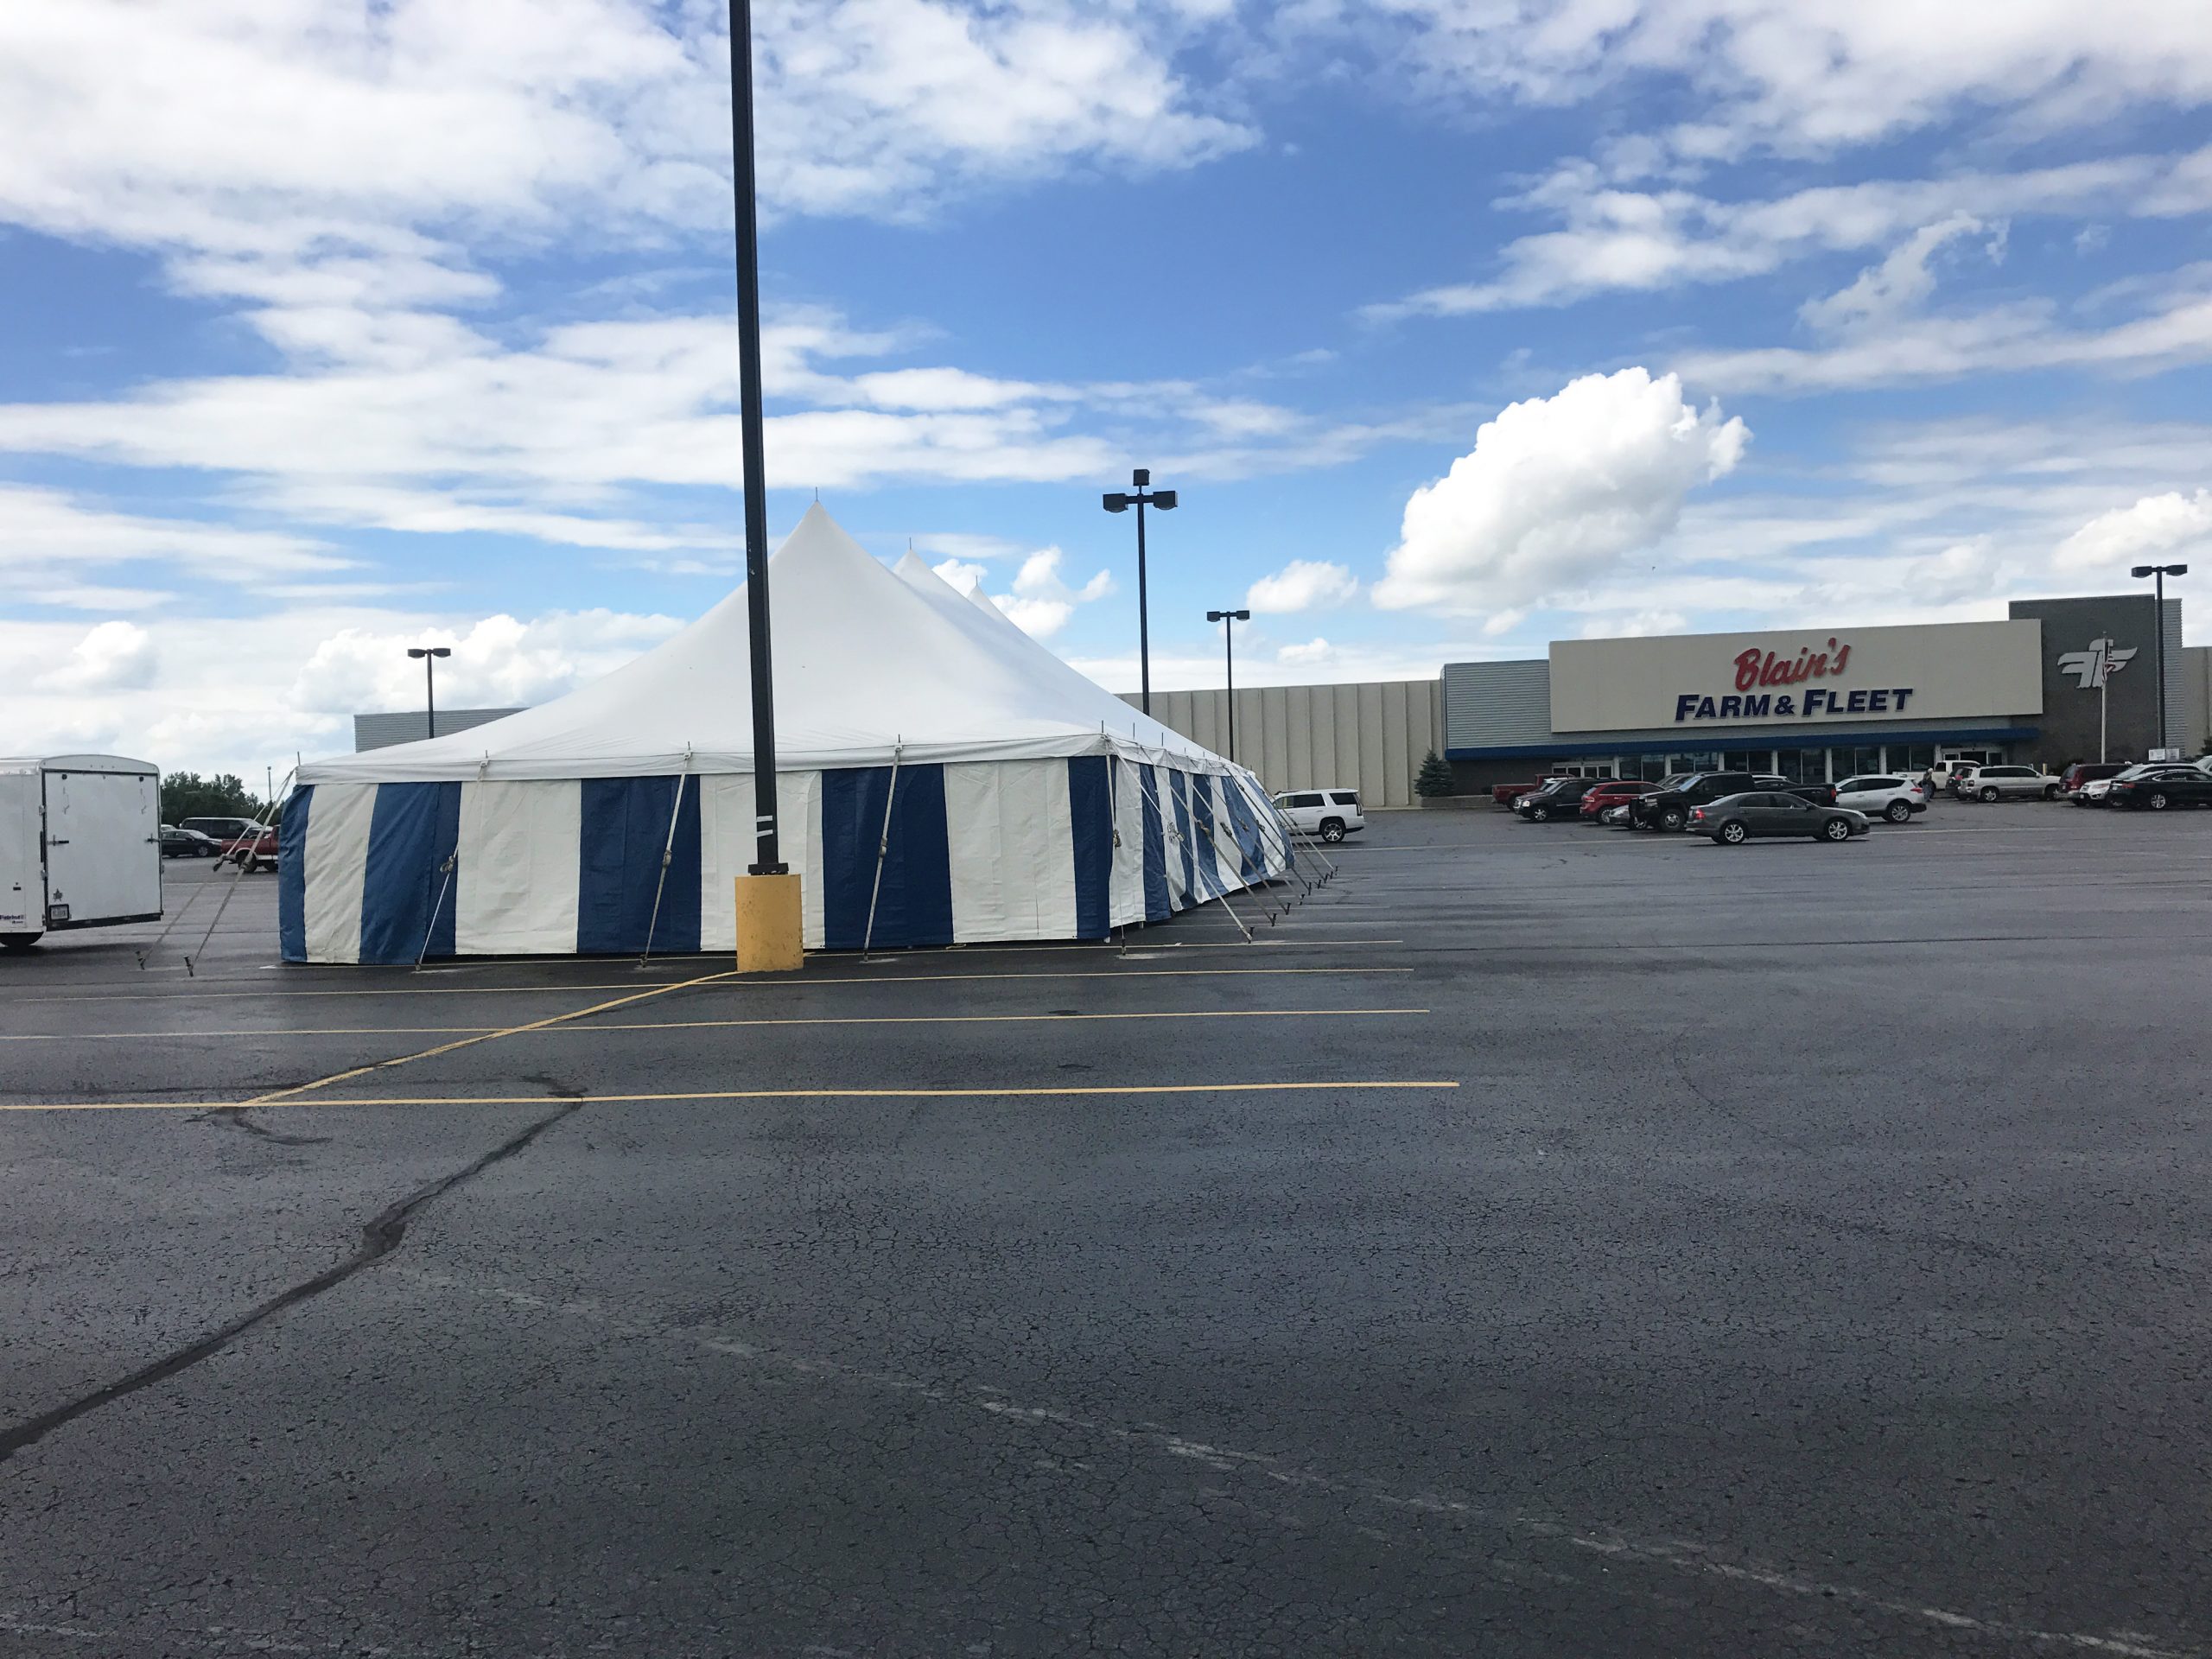 Fireworks stand at Blain's Farm & Fleet in Cedar Falls, Iowa (30' x 60' rope and pole tent with blue and white sidewall)